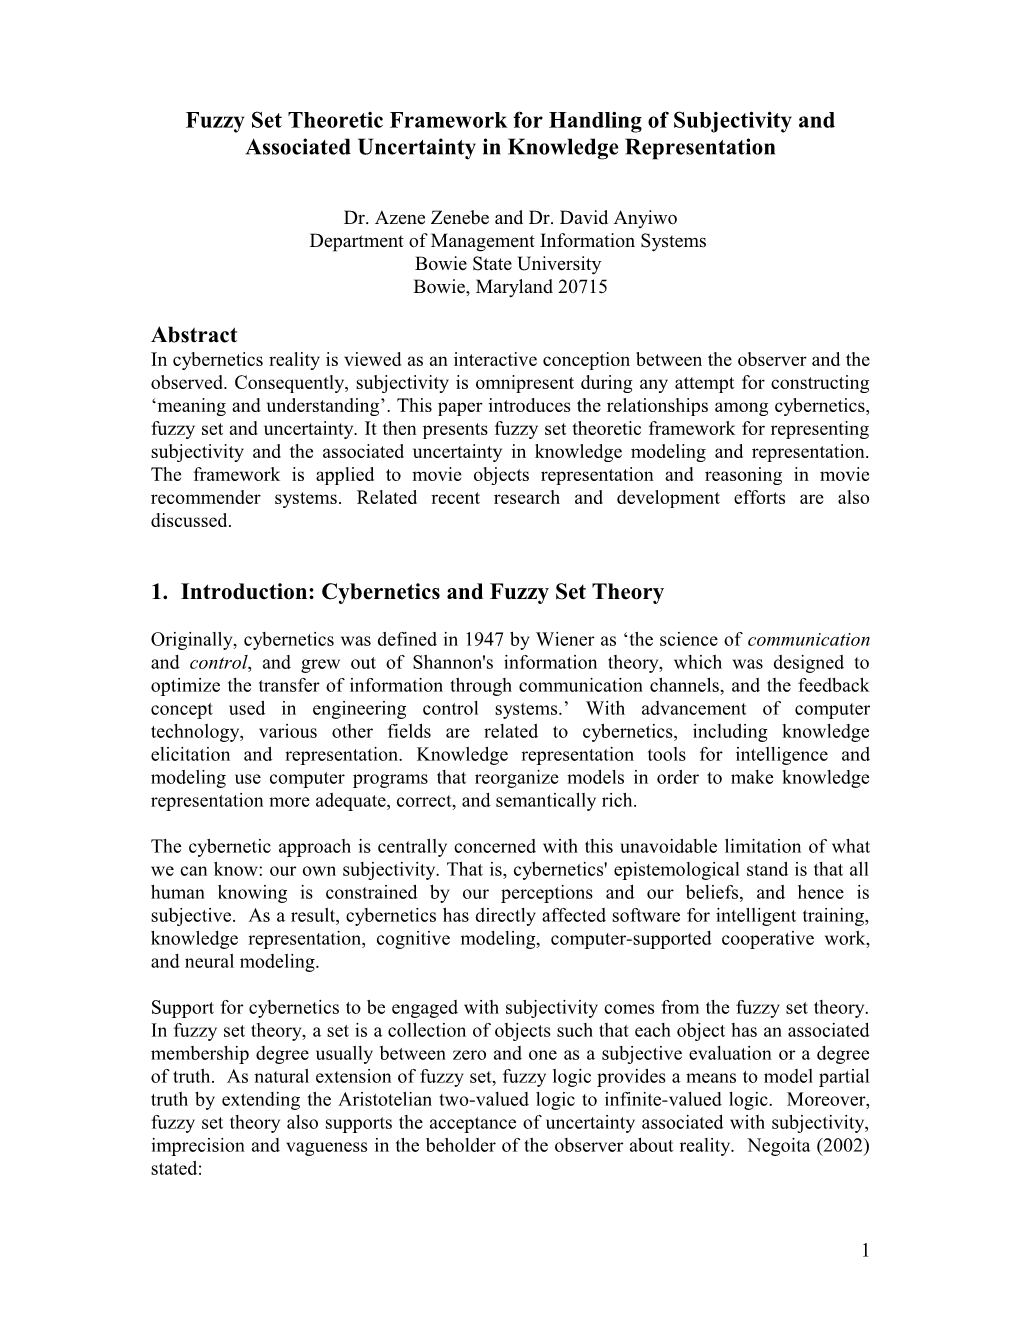 Fuzzy Set Theoretic Framework for Handling of Subjectivity and Associated Uncertainty